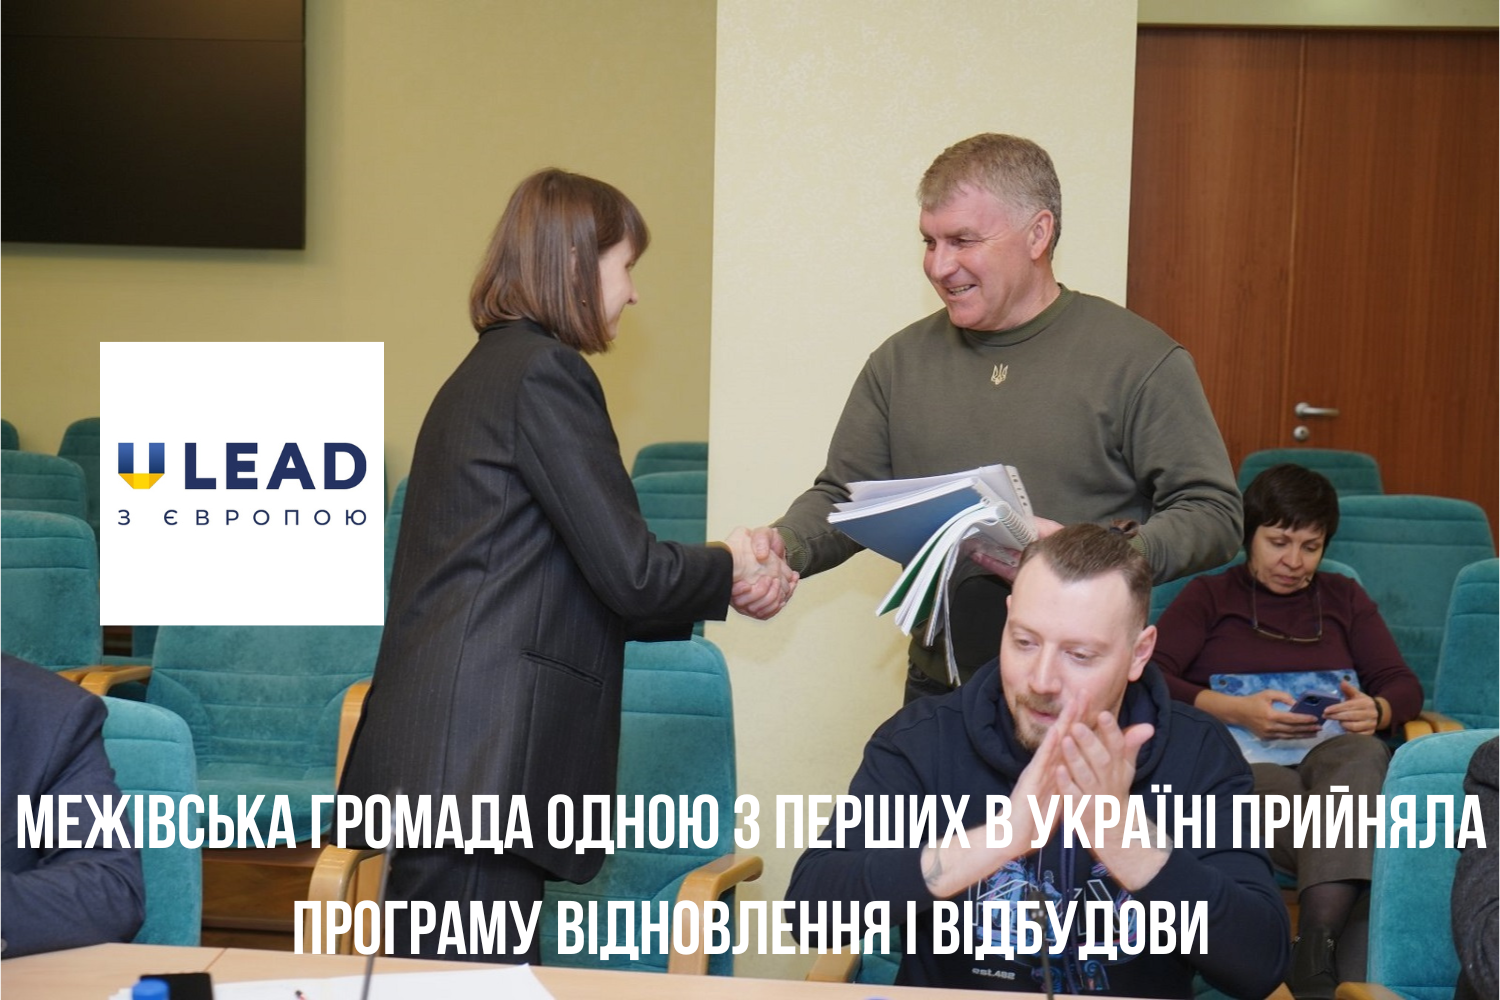 The Mezhova municipality is among the first in Ukraine to adopt the Recovery and Reconstruction Programme